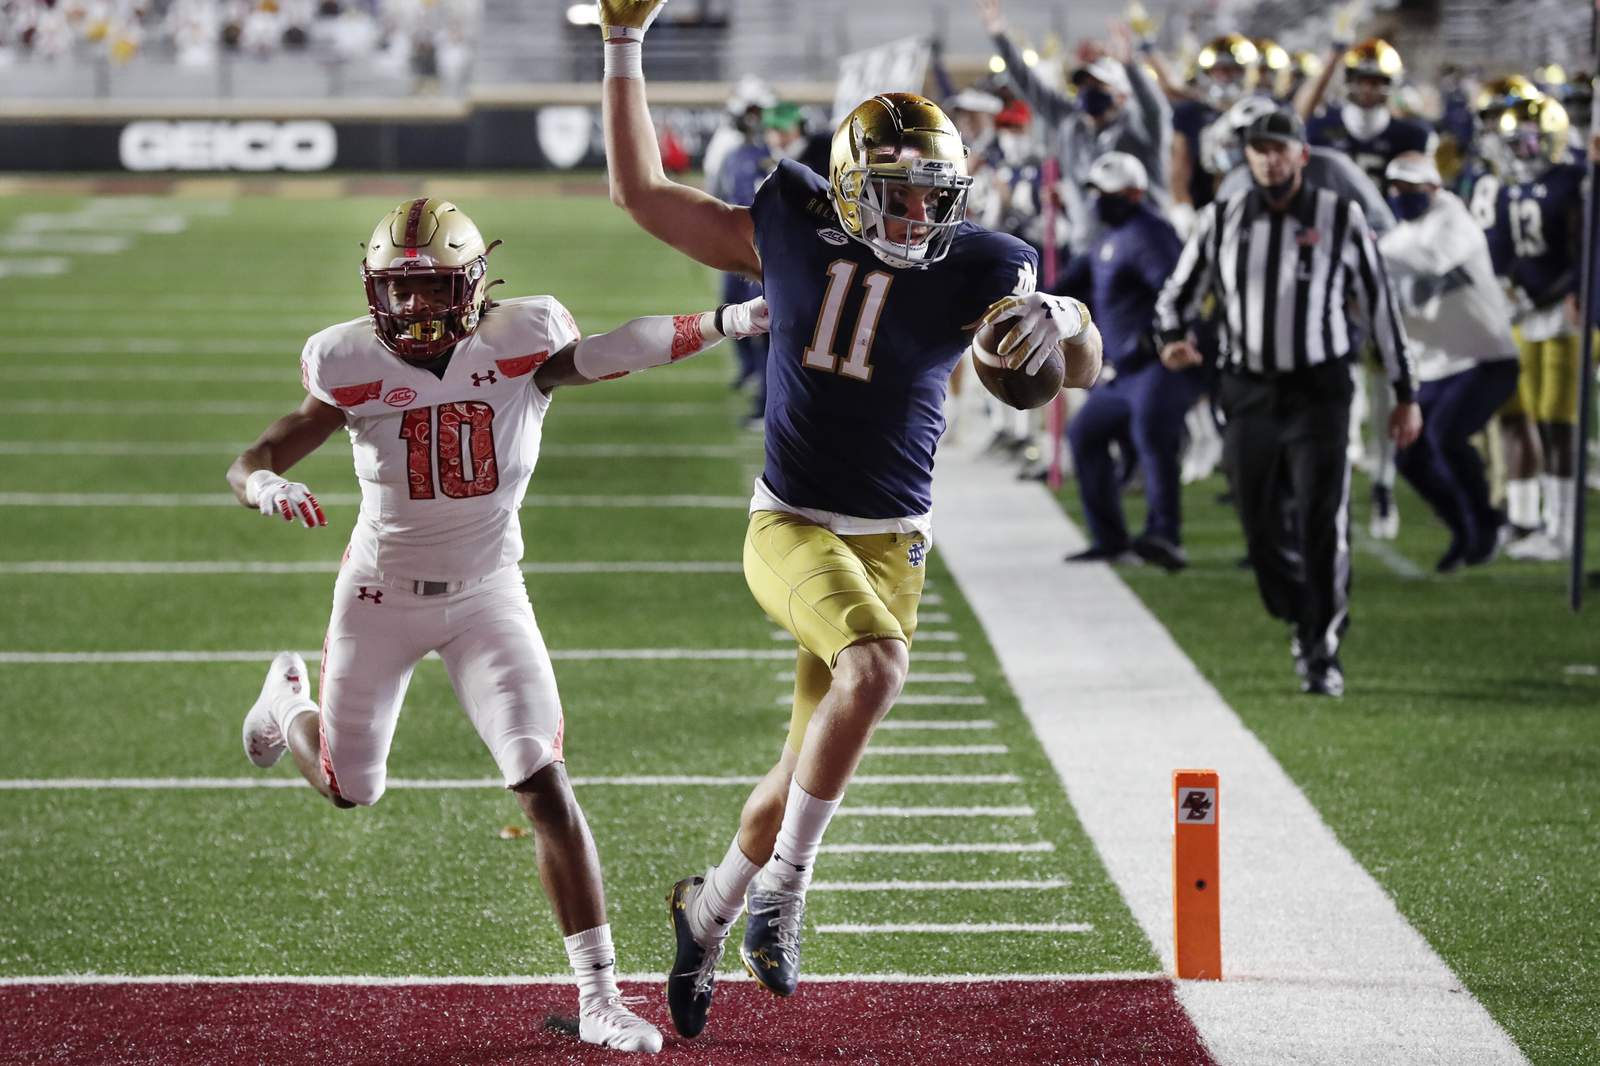 Kelly earns 100th win, No. 2 Notre Dame rolls past BC 45-31